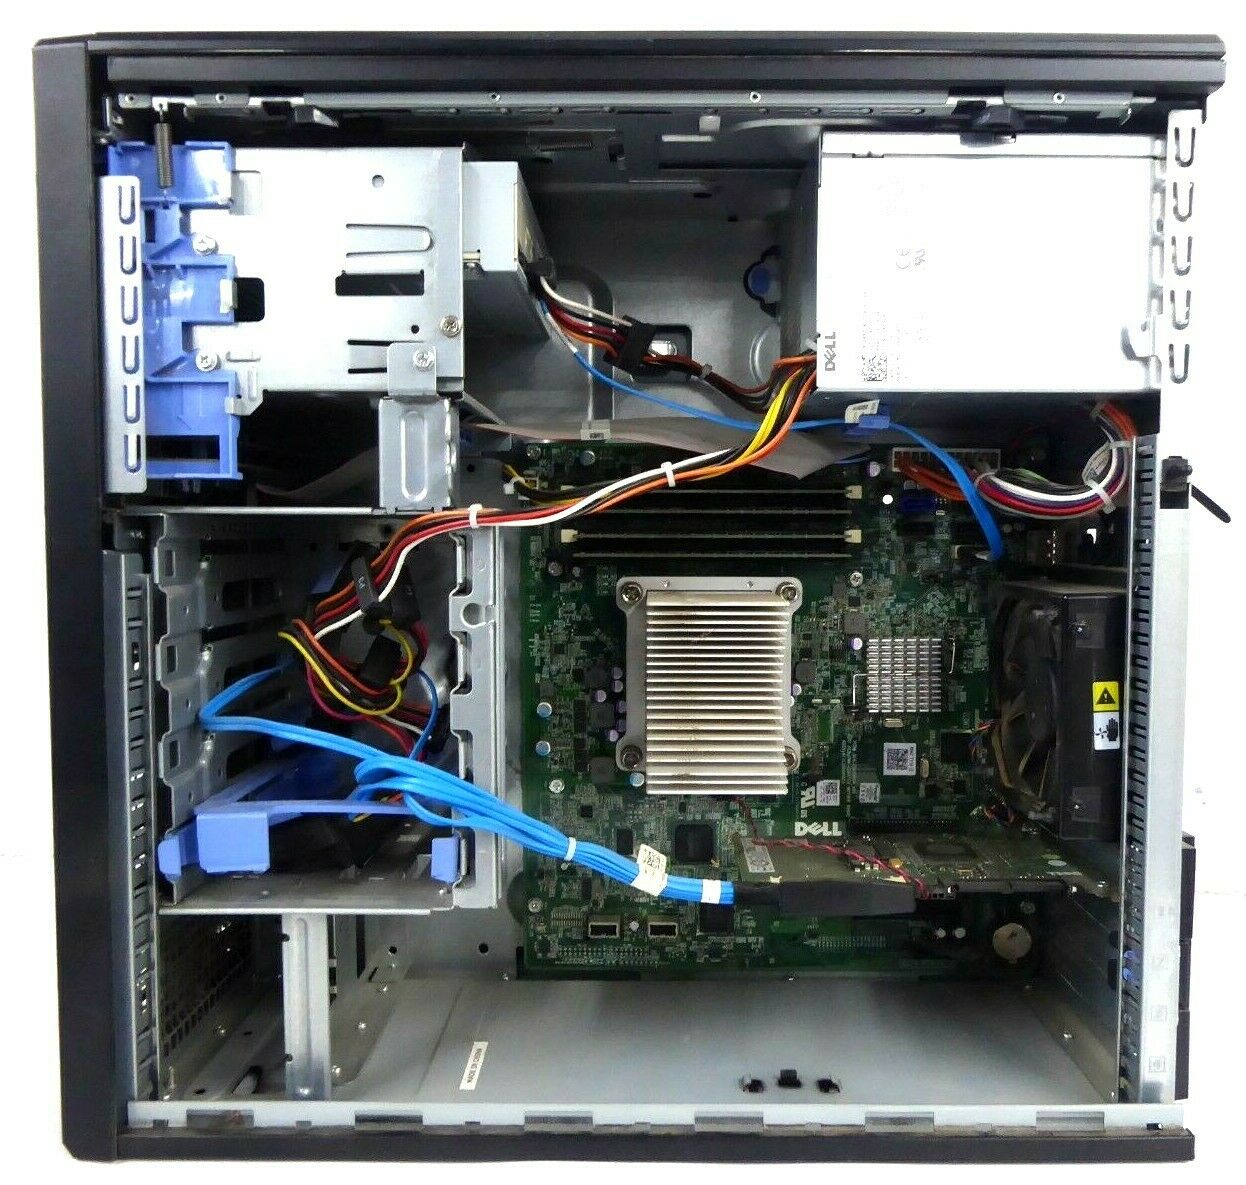 The insides of the PowerEdge T110ii